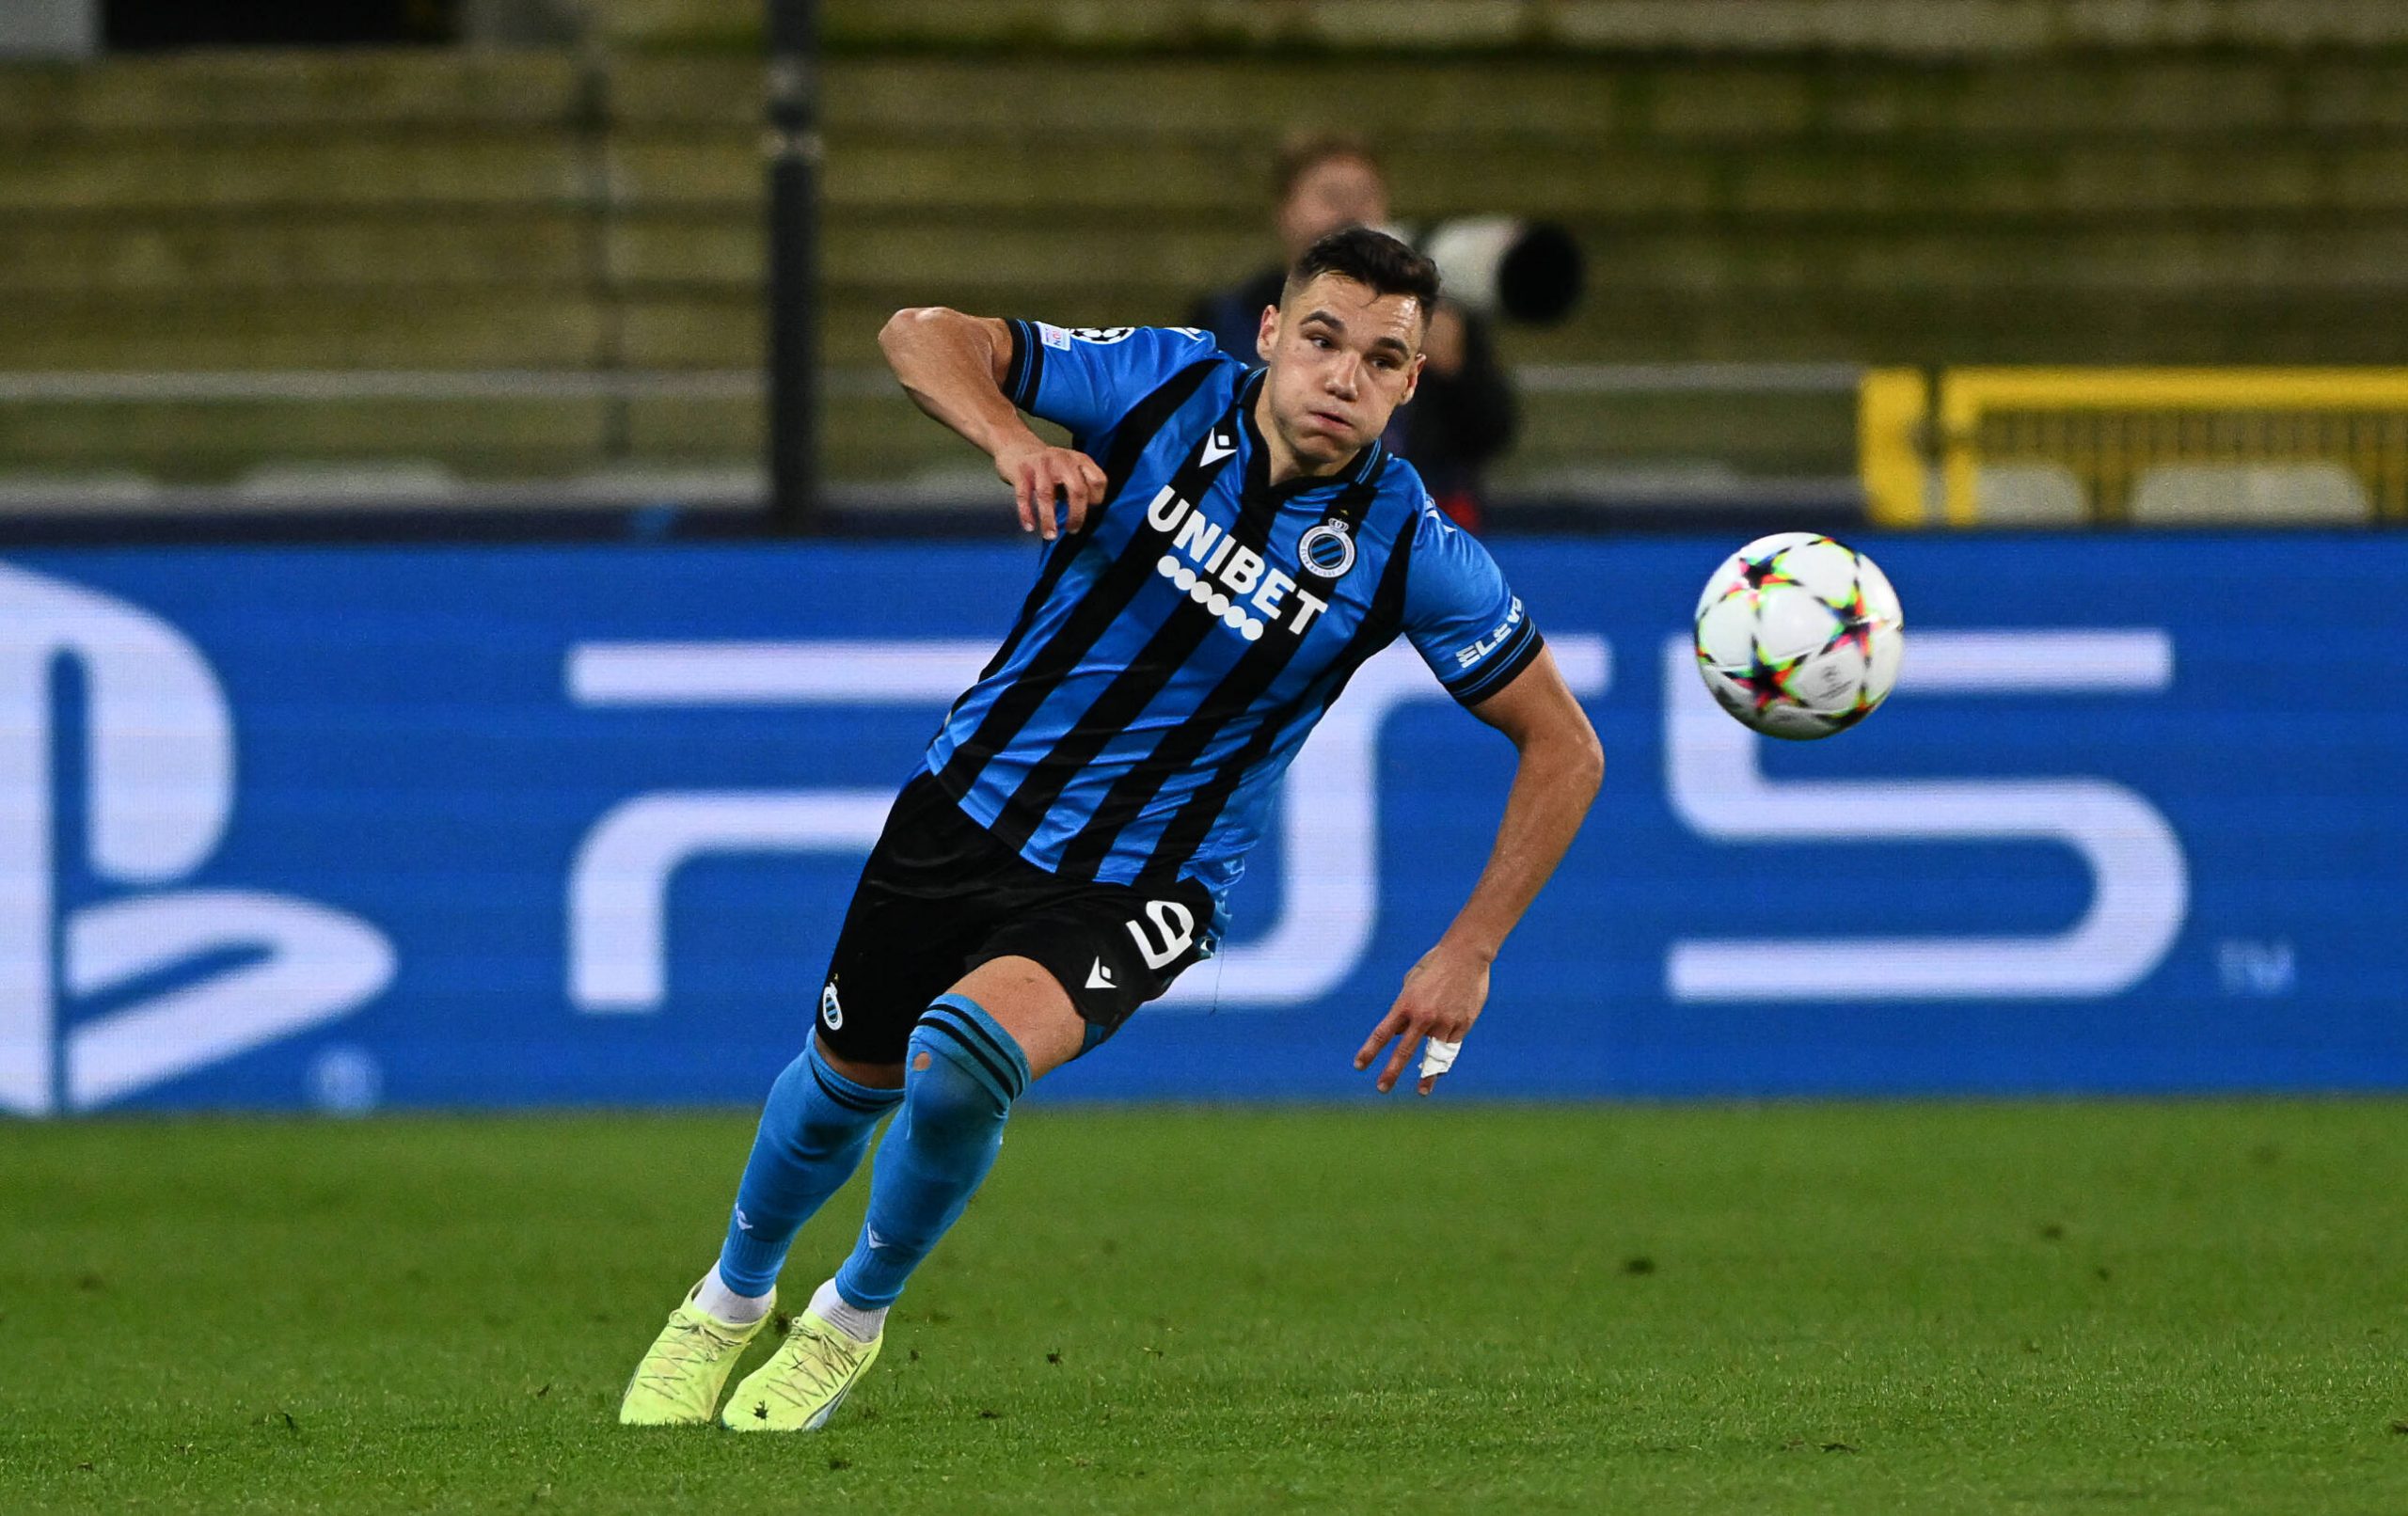 BELGIUM SOCCER UCL DAY3 GROUP B CLUB BRUGGE VS ATLETICO MADRID Ferran Jutgla 9 of Club Brugge pictured during a soccer game between Club Brugge KV and Atletico Madrid during the third matchday in group B in the Uefa Champions League for the 2022-2023 season , on Tuesday 4 th of October 2022 in Brugge , Belgium . PHOTO DAVID CATRY SPORTPIX Brugge Jan Breydelstadion West-Vlaanderen Belgium PUBLICATIONxNOTxINxBEL Copyright: xSportpix.bex xDavidxCatryxDavidxCatryx